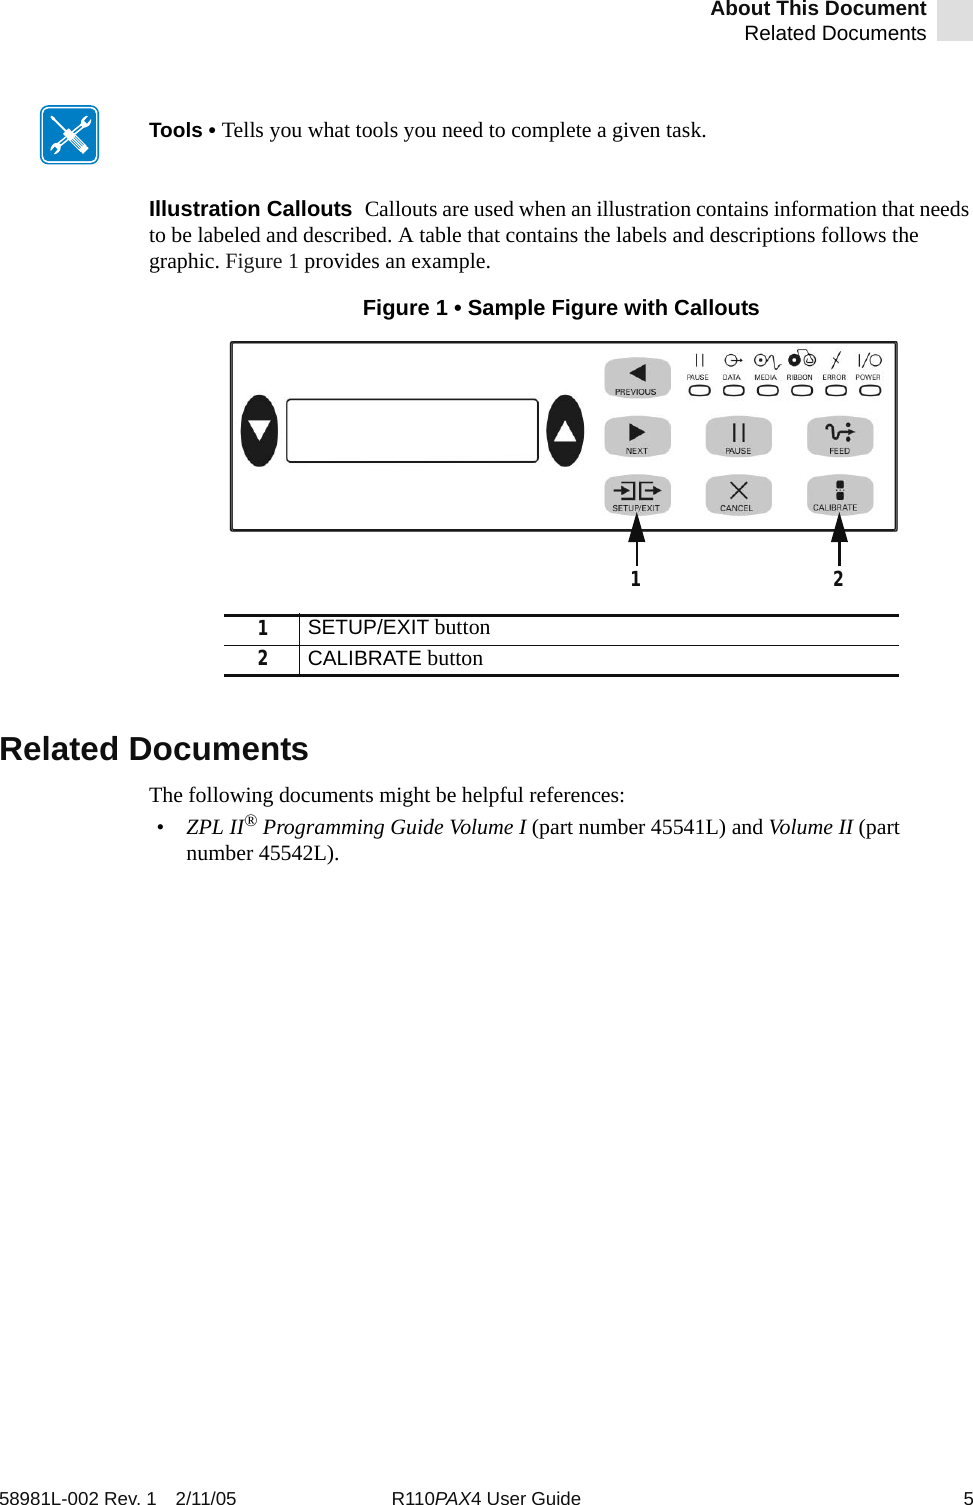 About This DocumentRelated Documents58981L-002 Rev. 1 2/11/05 R110PAX4 User Guide 5Illustration Callouts  Callouts are used when an illustration contains information that needs to be labeled and described. A table that contains the labels and descriptions follows the graphic. Figure 1 provides an example.Figure 1 • Sample Figure with CalloutsRelated DocumentsThe following documents might be helpful references:•ZPL II® Programming Guide Volume I (part number 45541L) and Volume II (part number 45542L).Tools • Tells you what tools you need to complete a given task.1SETUP/EXIT button2CALIBRATE button21